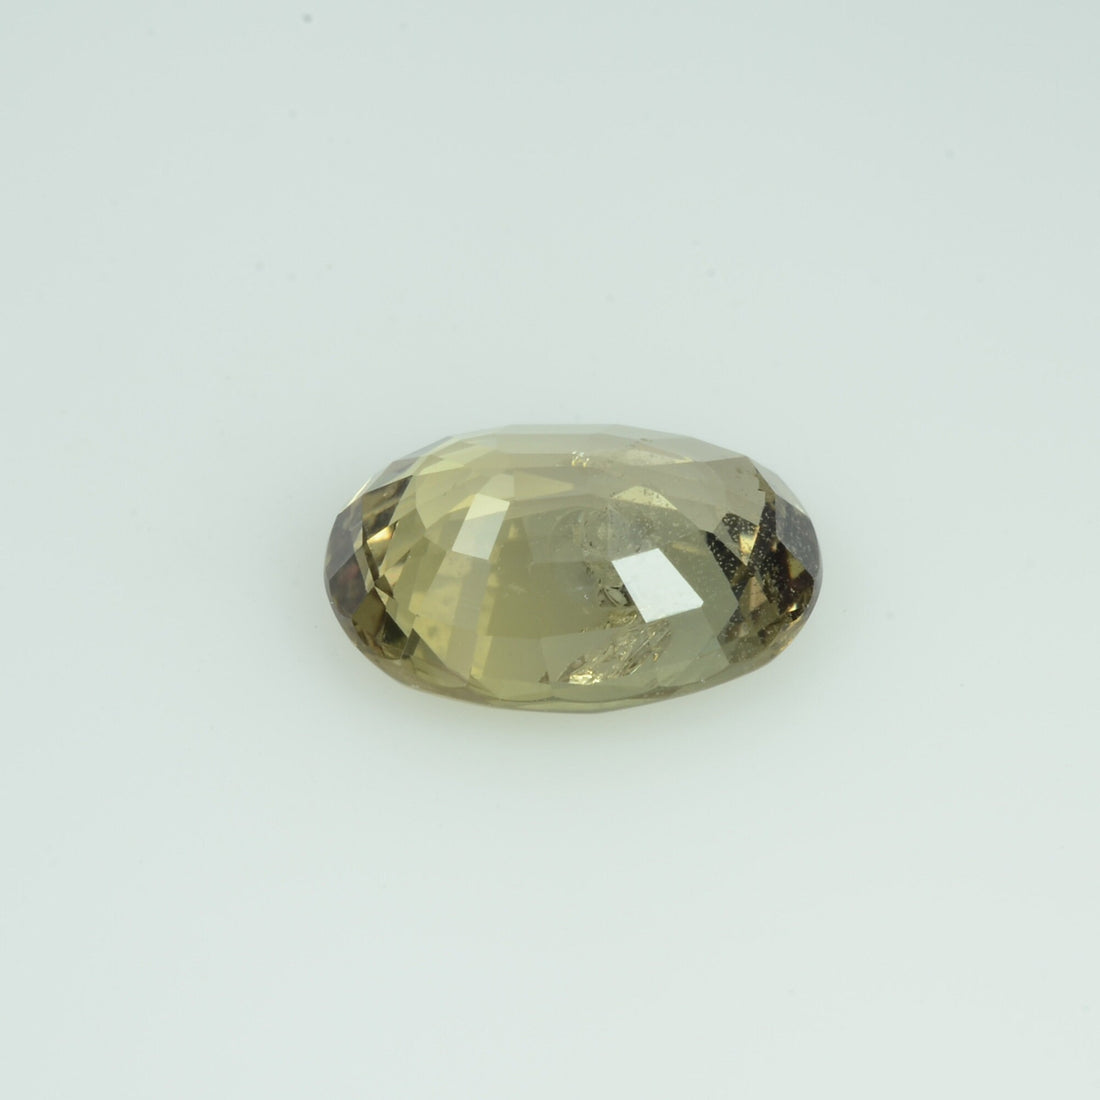 2.59 Cts Natural Fancy Sapphire Loose Gemstone Oval Cut